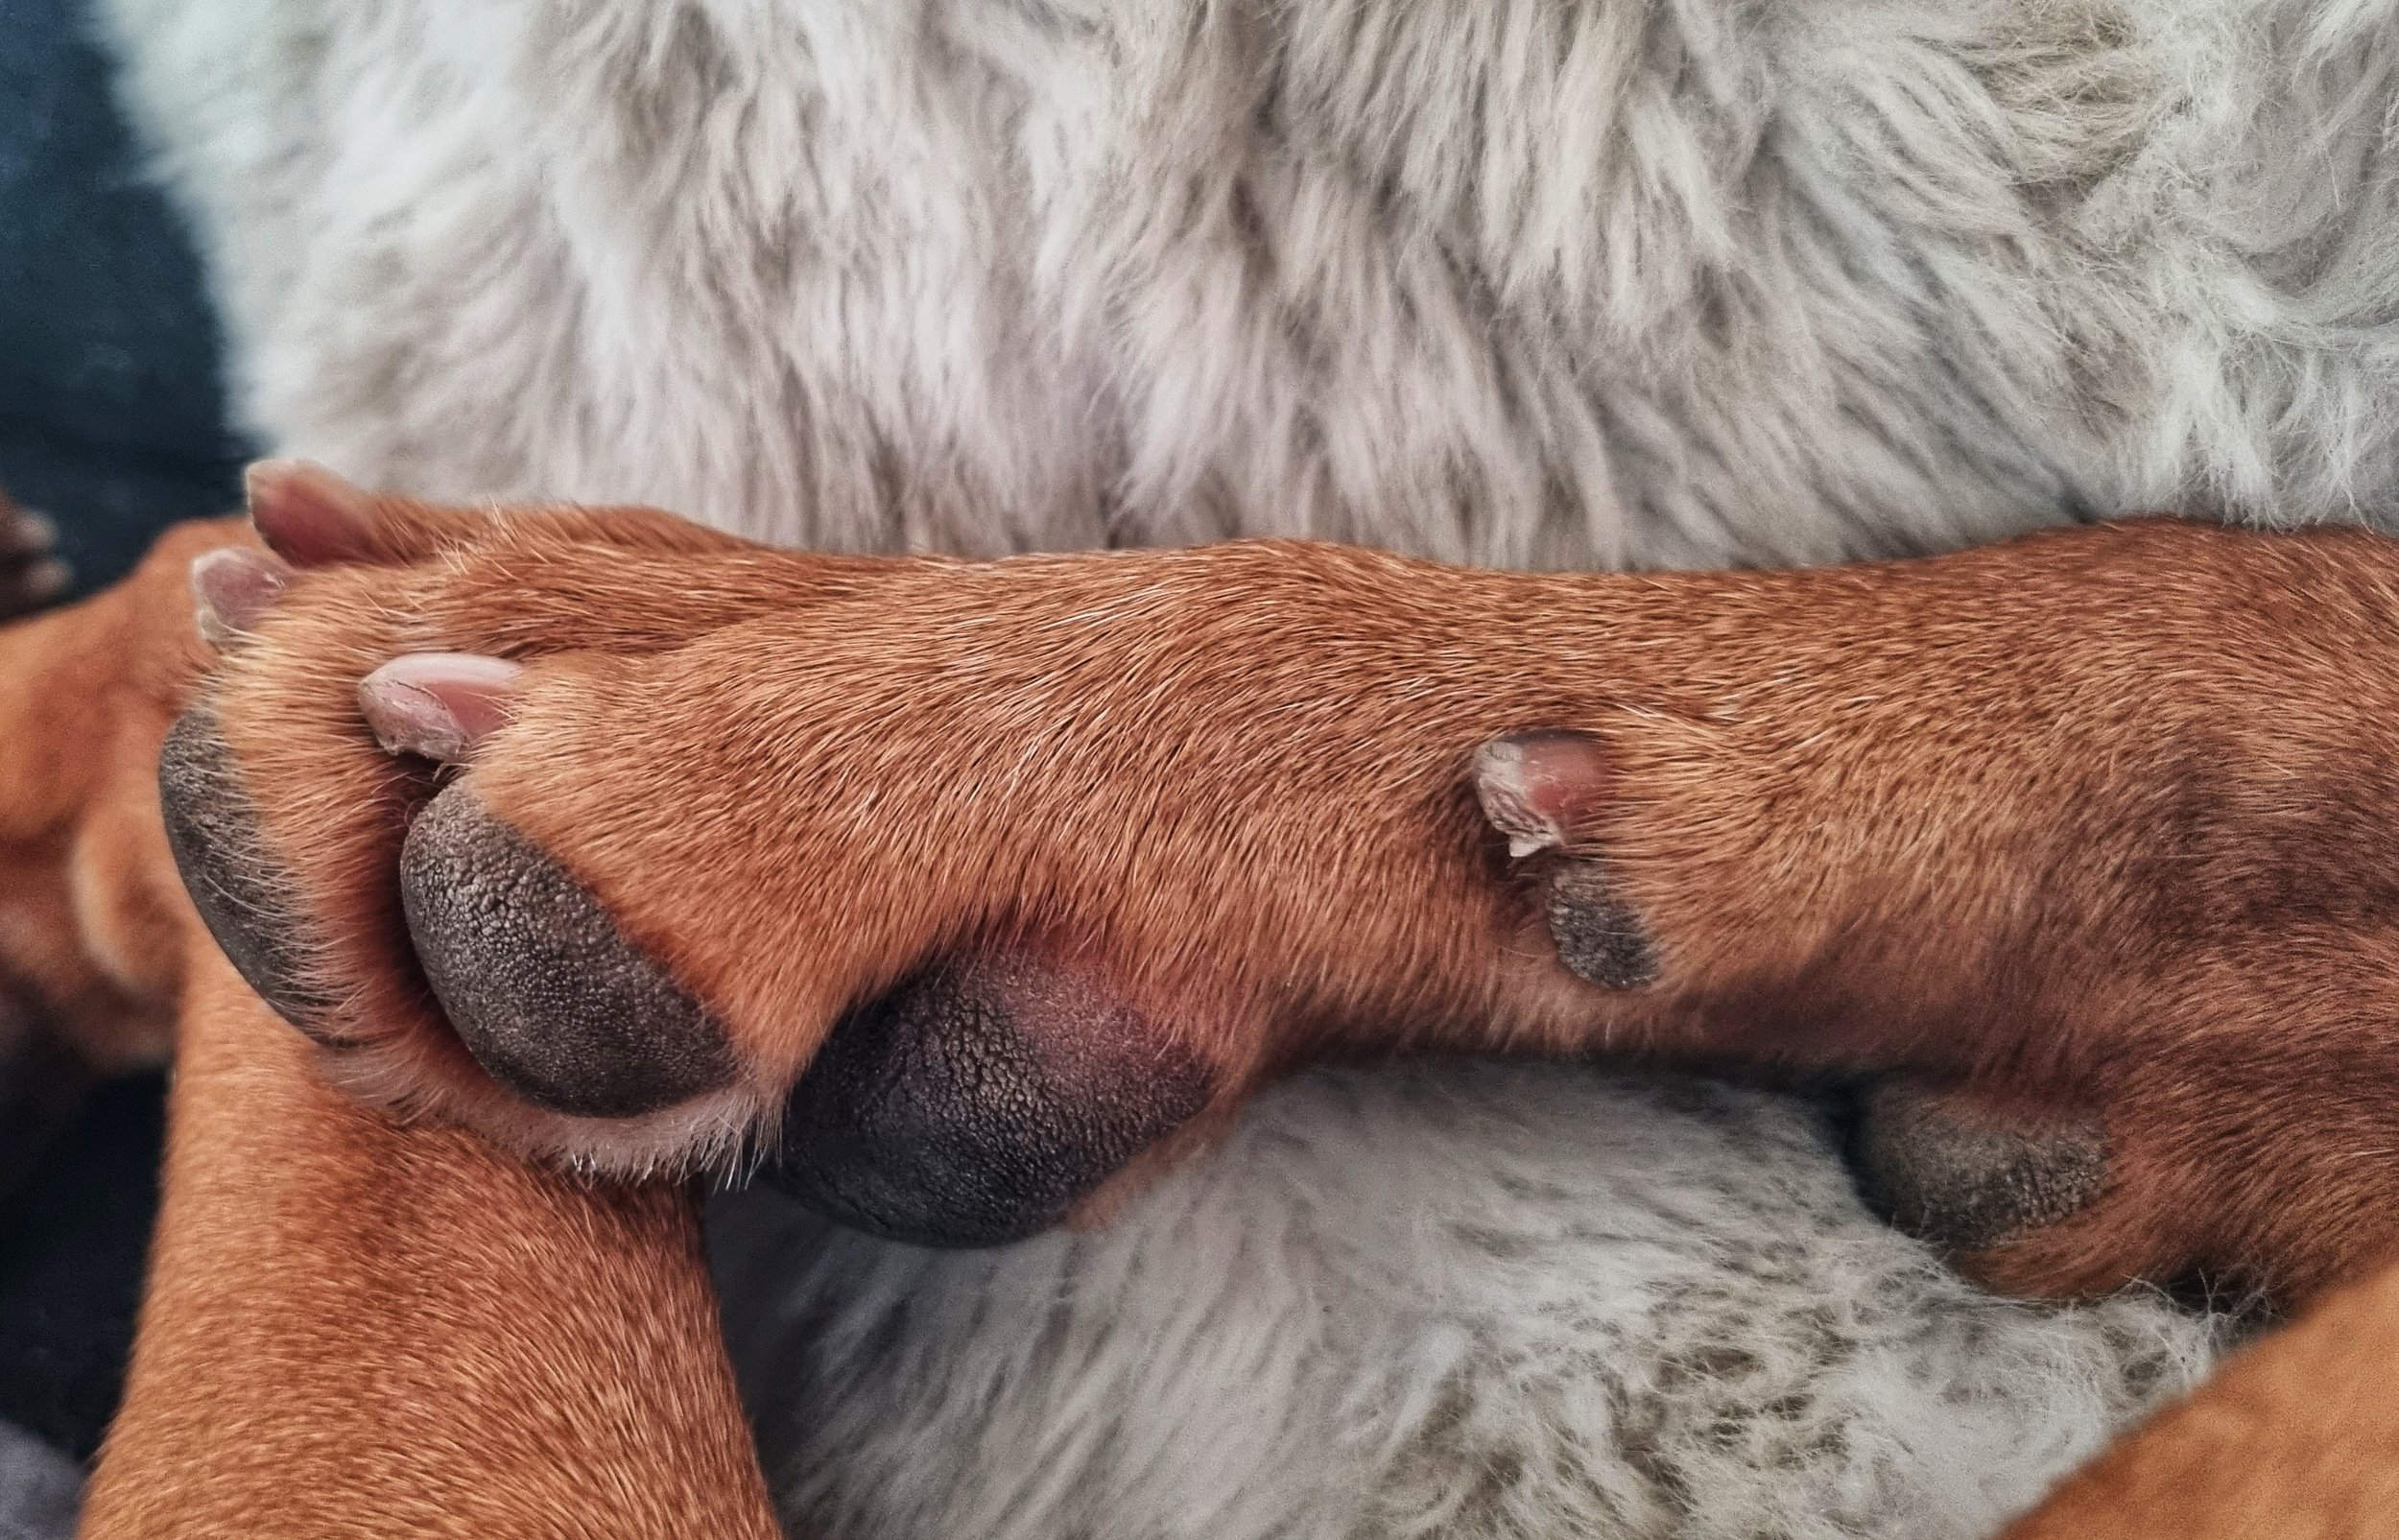 How To Stop a Dog's Nail From Bleeding